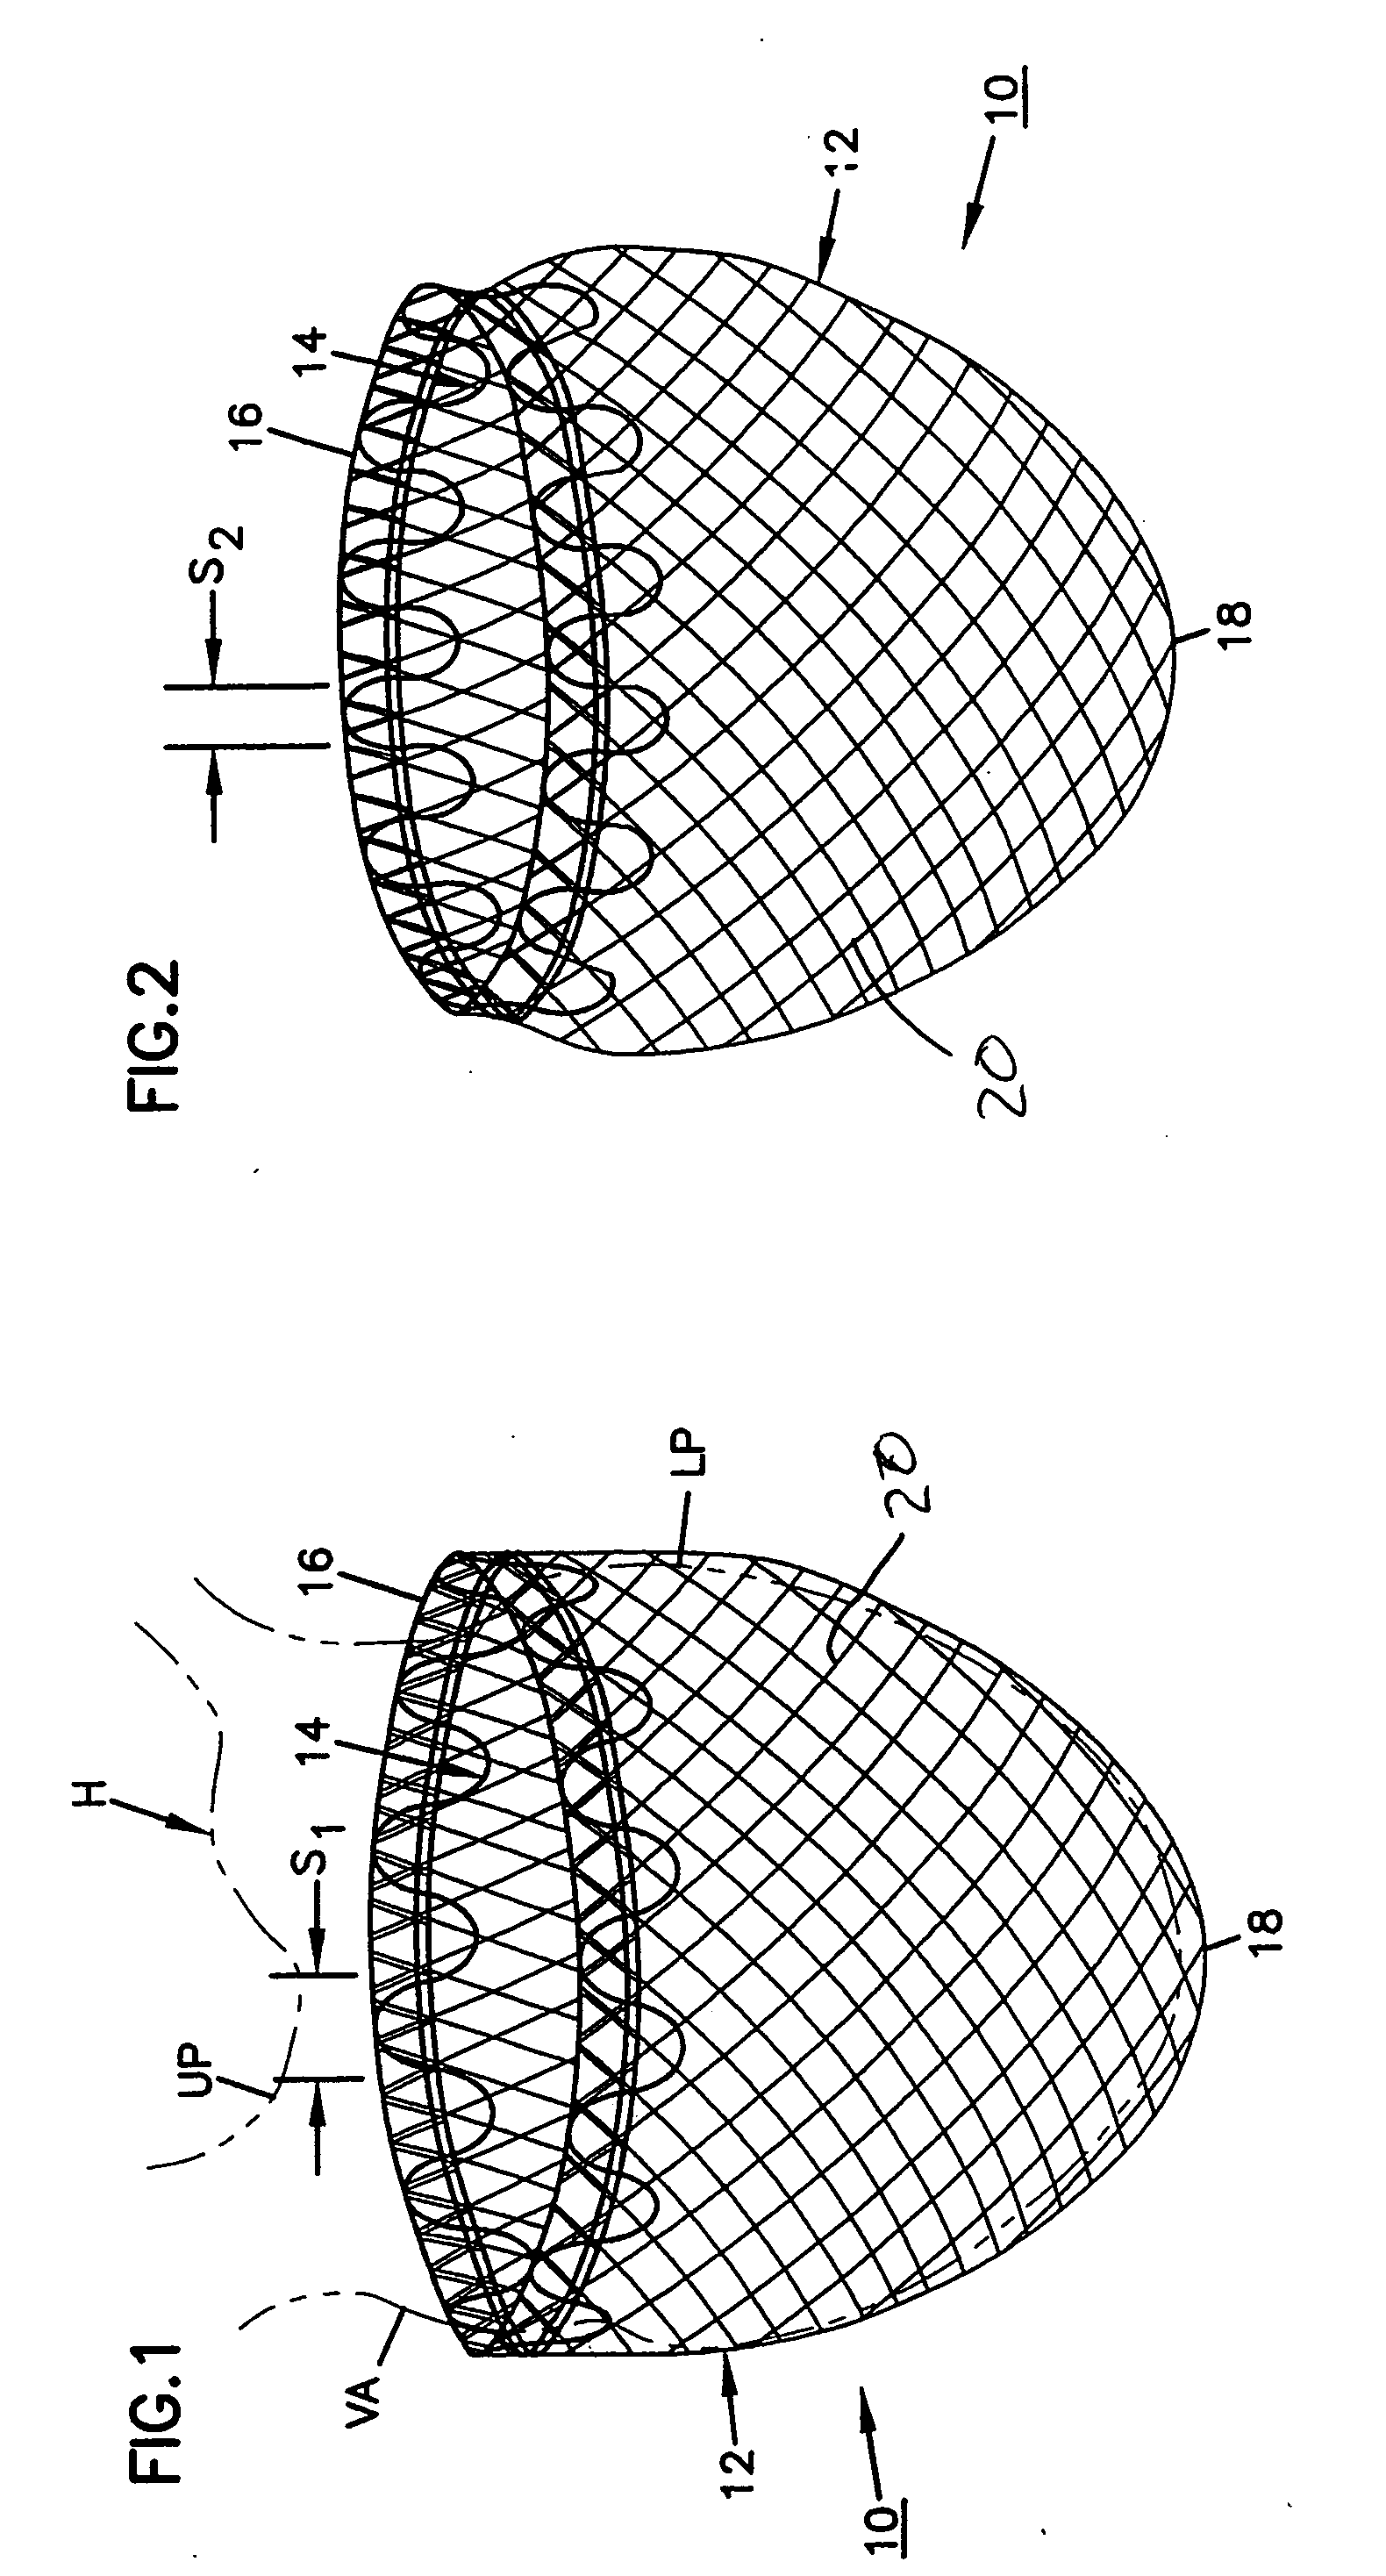 Self-adjusting attachment structure for a cardiac support device